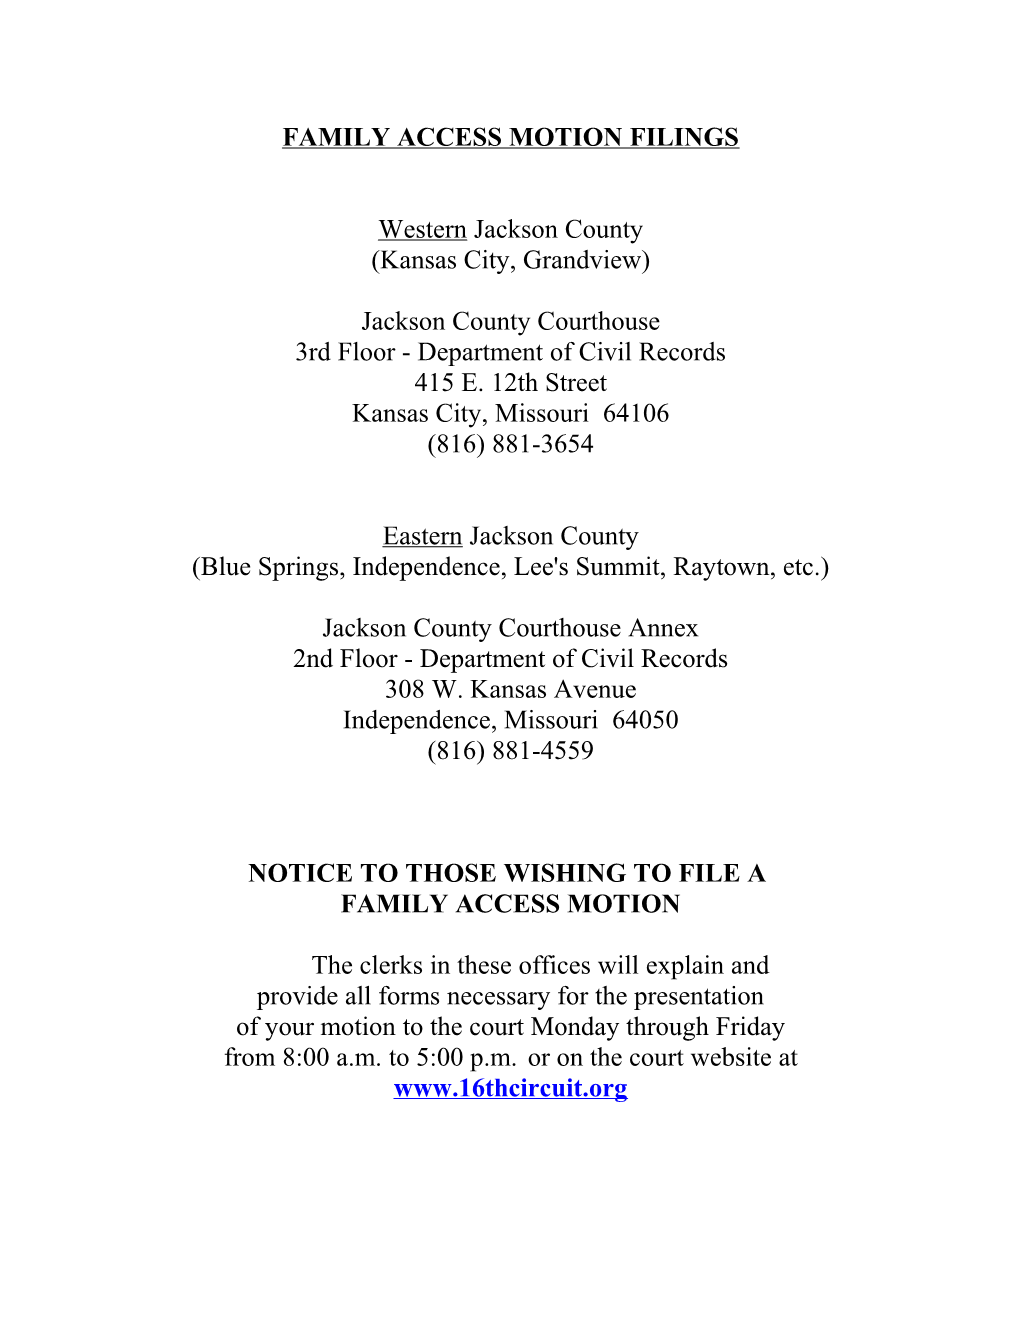 Family Access Information